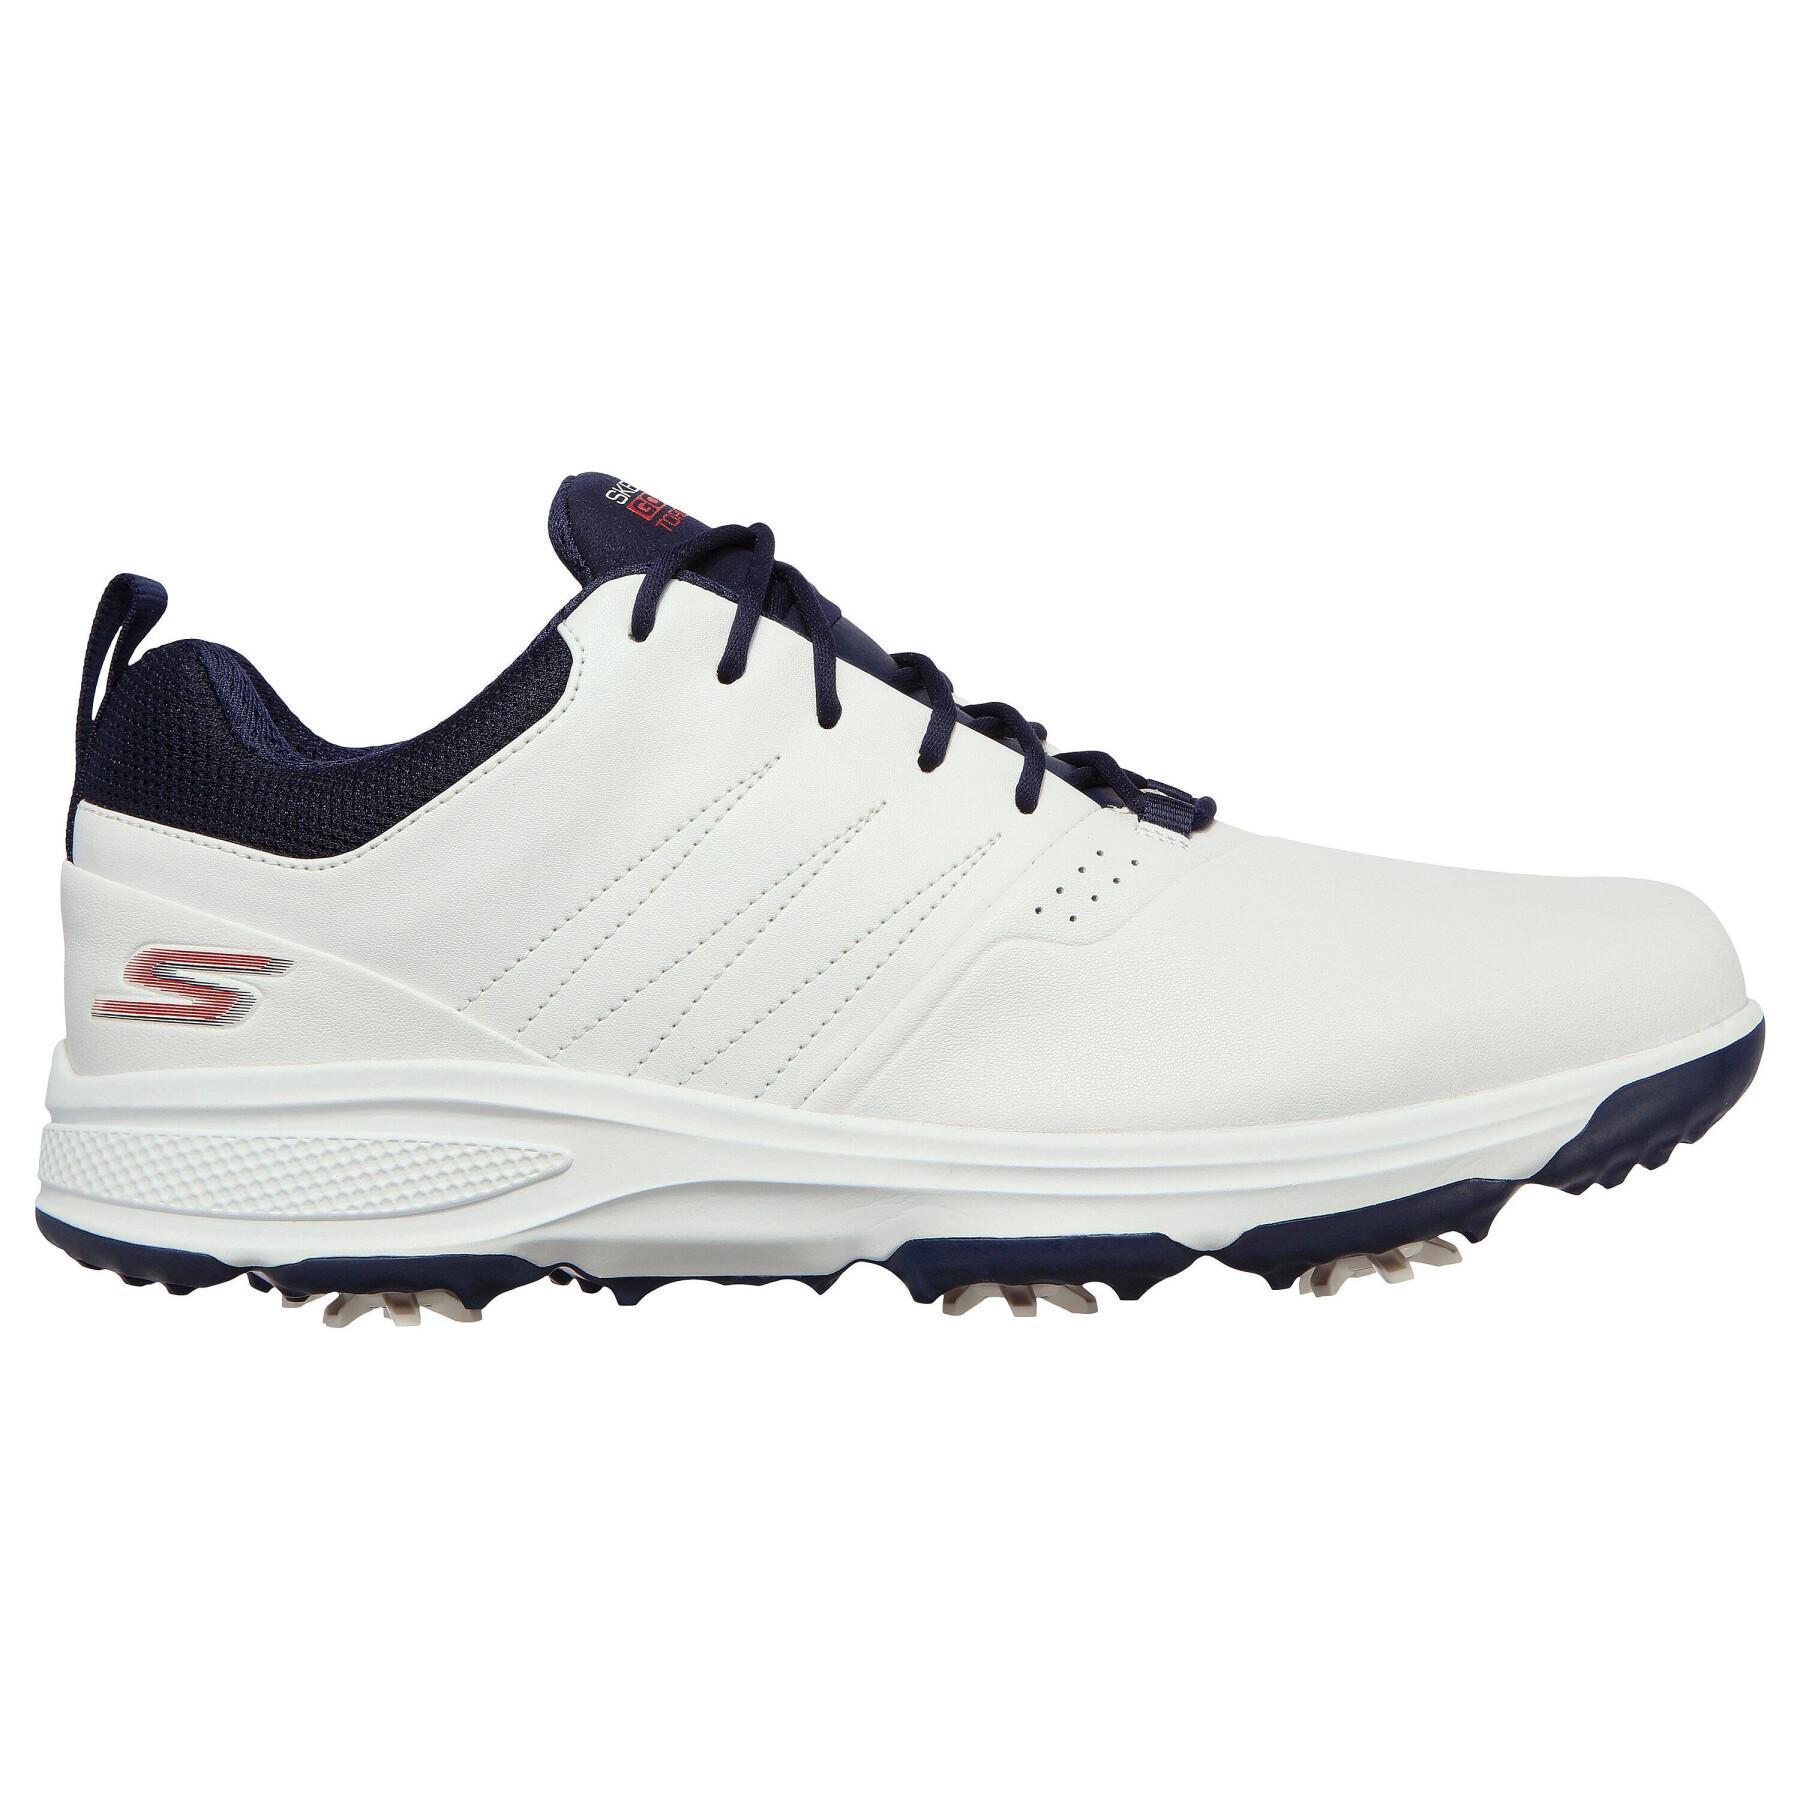 Golf shoes with spikes Skechers GO GOLF Torque